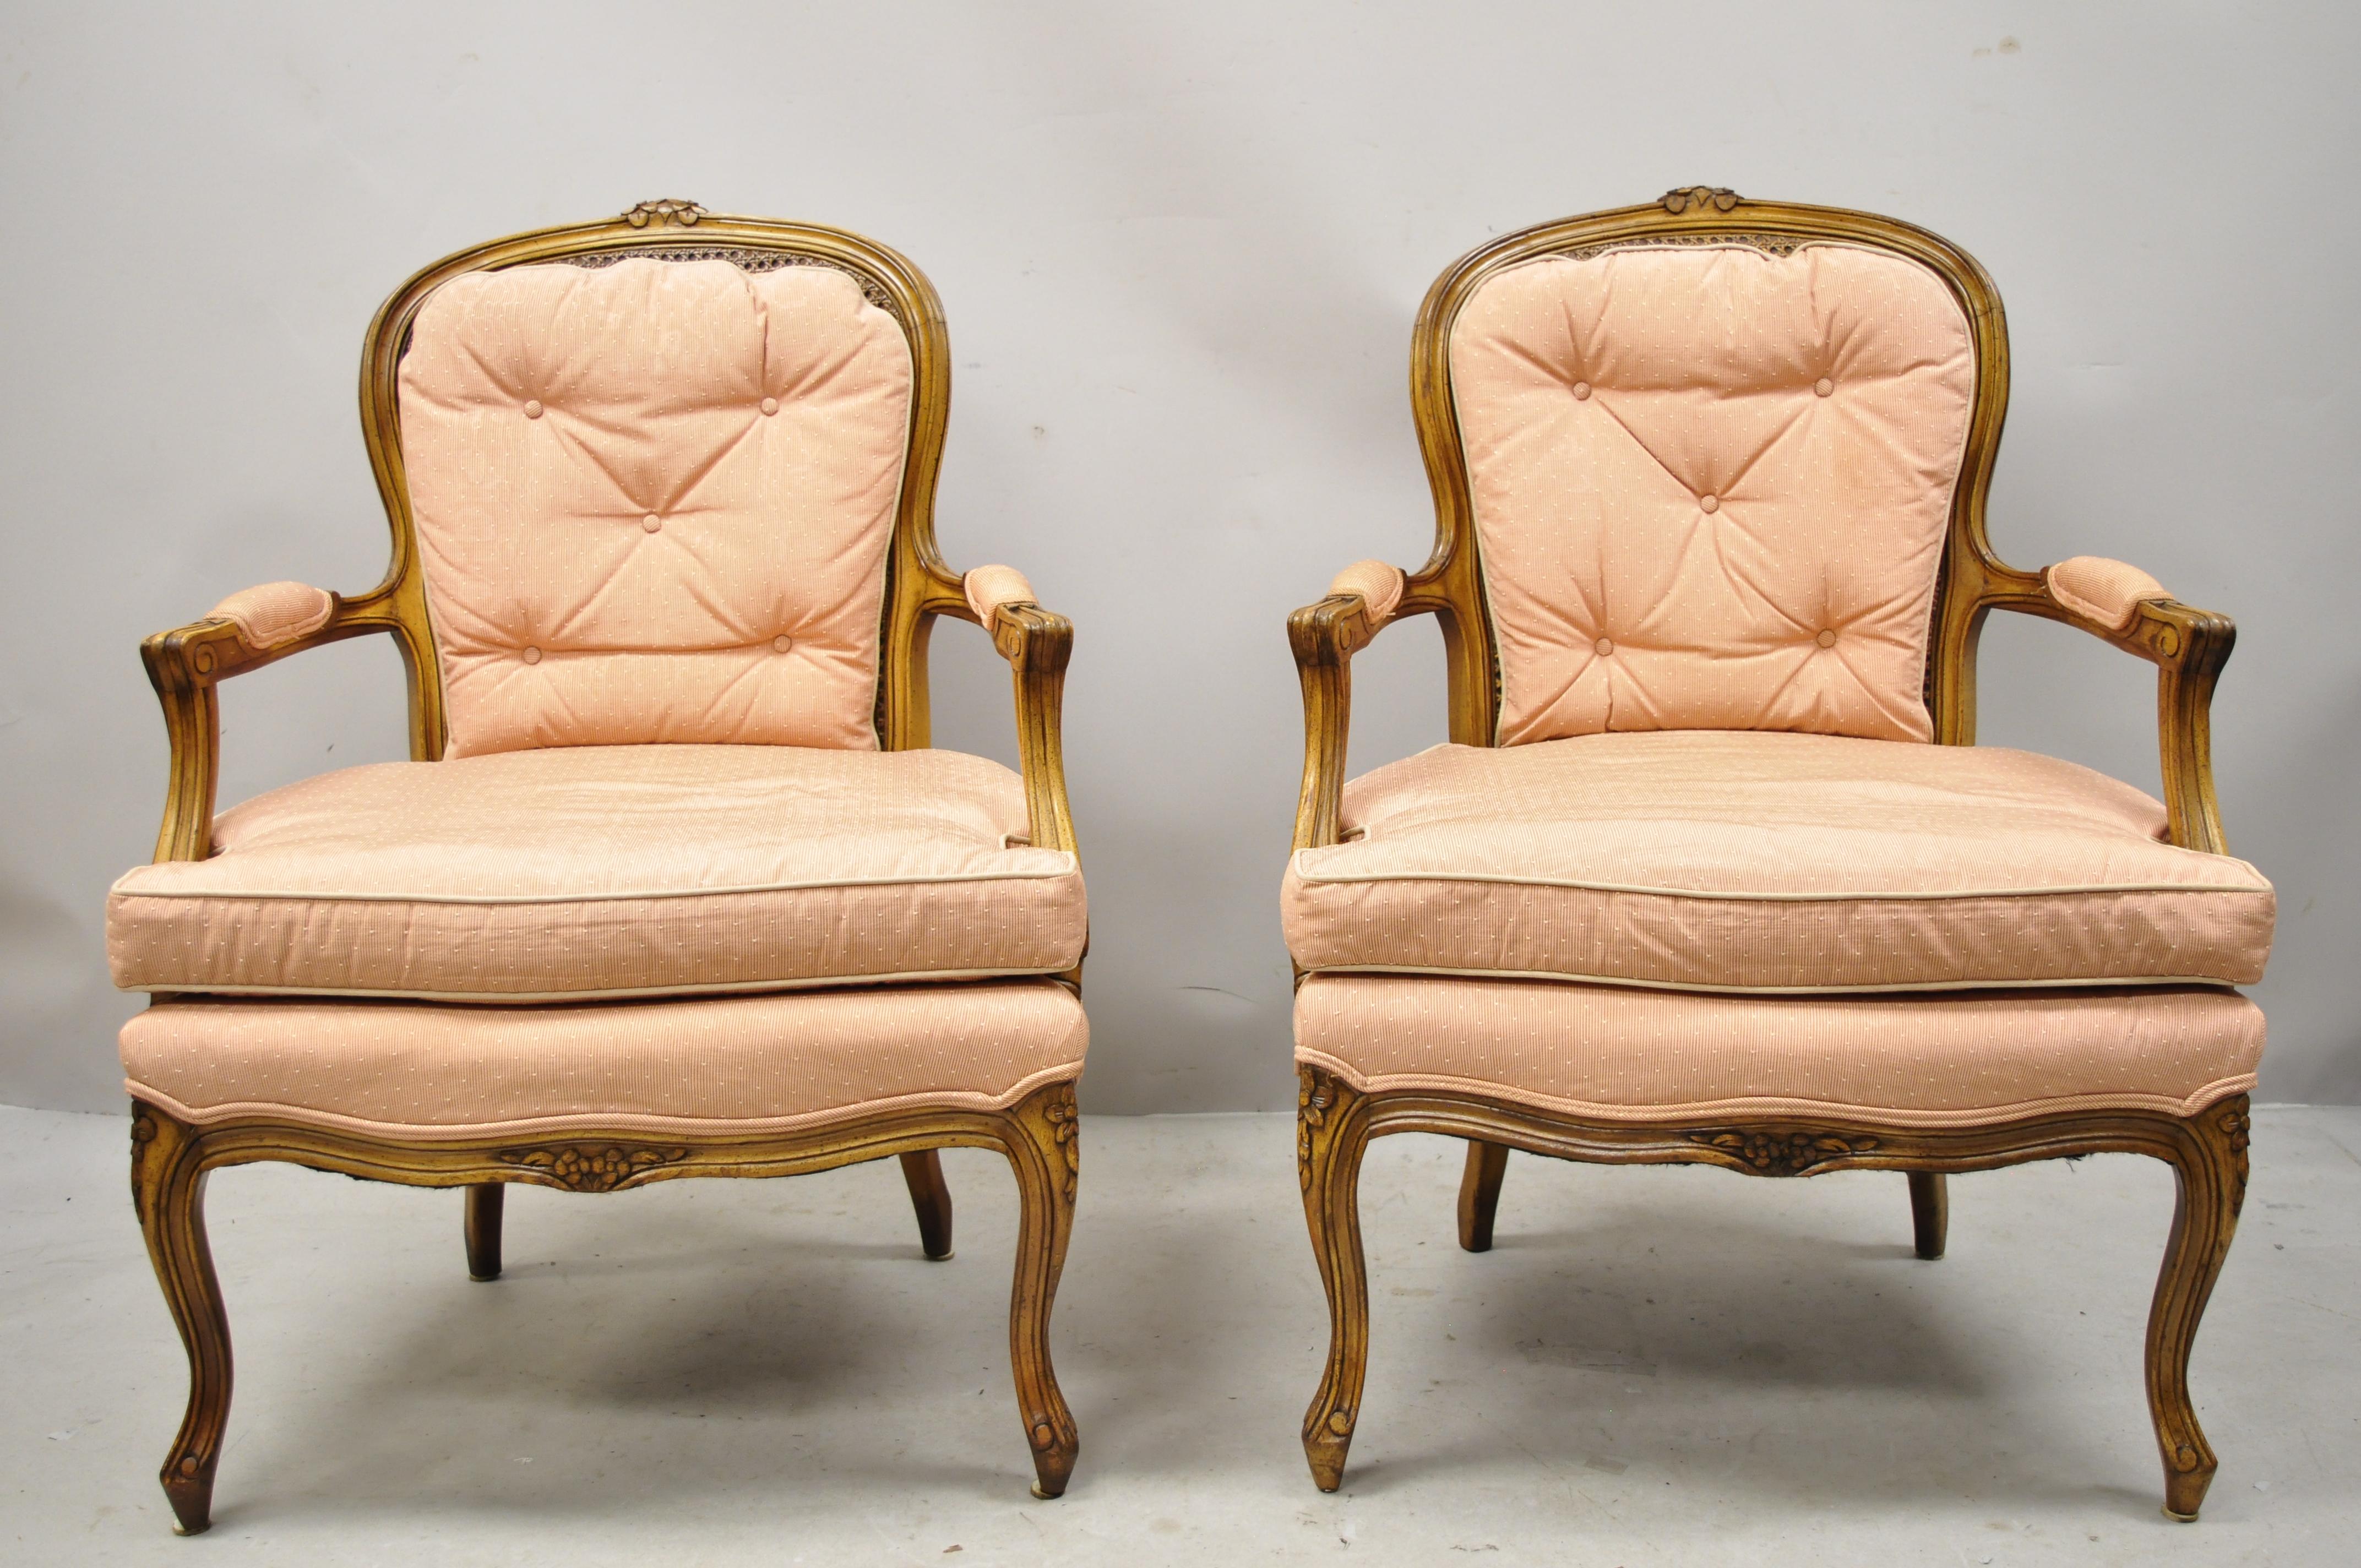 French Louis XV Provincial style carved walnut cane back armchairs - a pair. Item features cane backs, solid wood frame, upholstered armrests, nicely carved details, cabriole legs, very nice vintage item, great style and form, circa early to